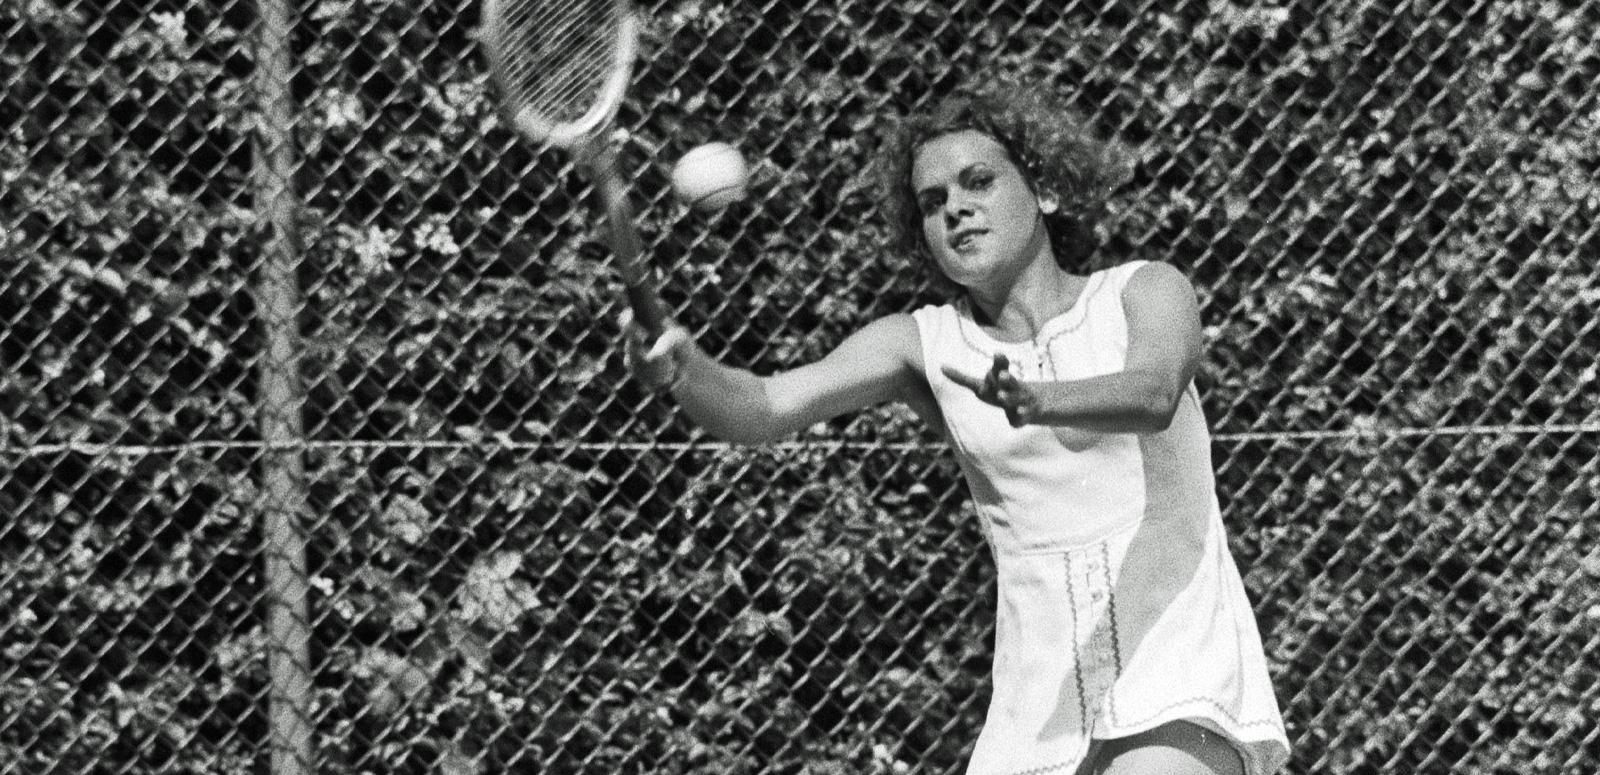 Evonne Goolagong-Cawley holding a wooden tennis racket and about to hit a tennis ball.